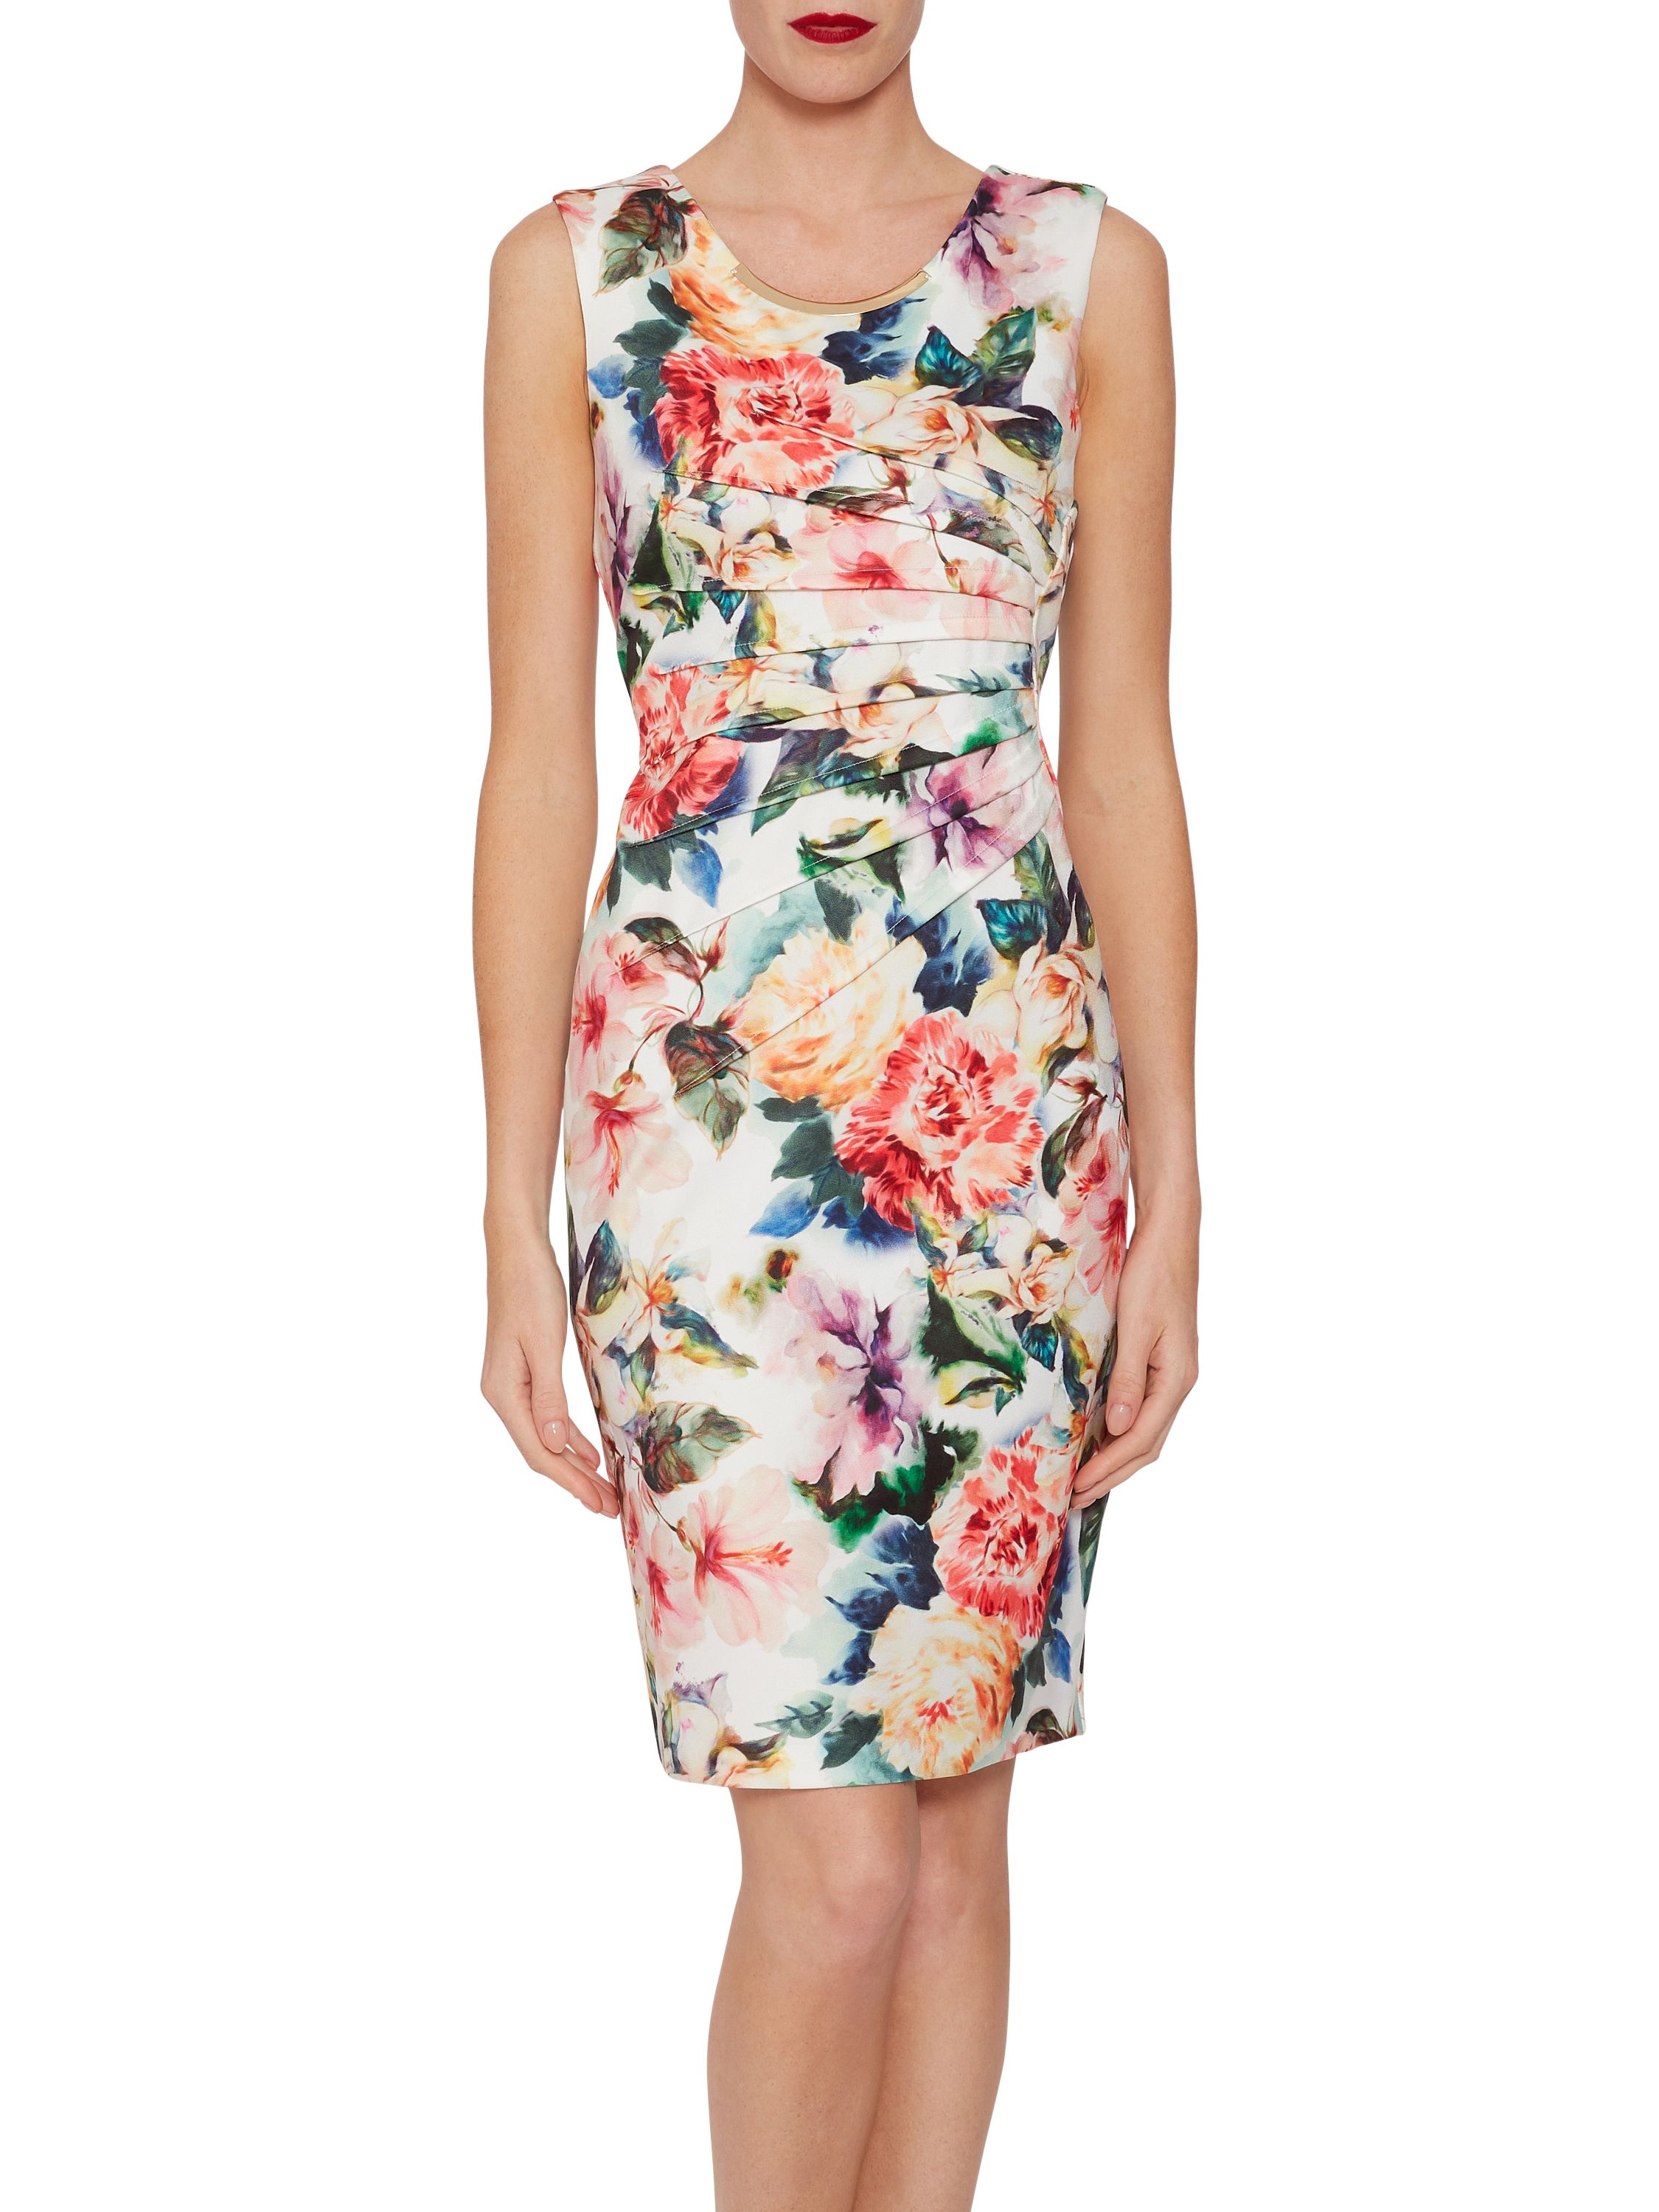 Feel elegant in this floral scuba dress by Gina Bacconi. Fashioned from a soft scuba stretch fabric, this piece offers both comfort and elegance. At the waist the dress features bold asymmetric design: darts radiate boldly from the side to flatter and give a modern edge to the dress. A gold insert at the neck makes for a glamorous finish. The dress fastens using a conealed back zip.